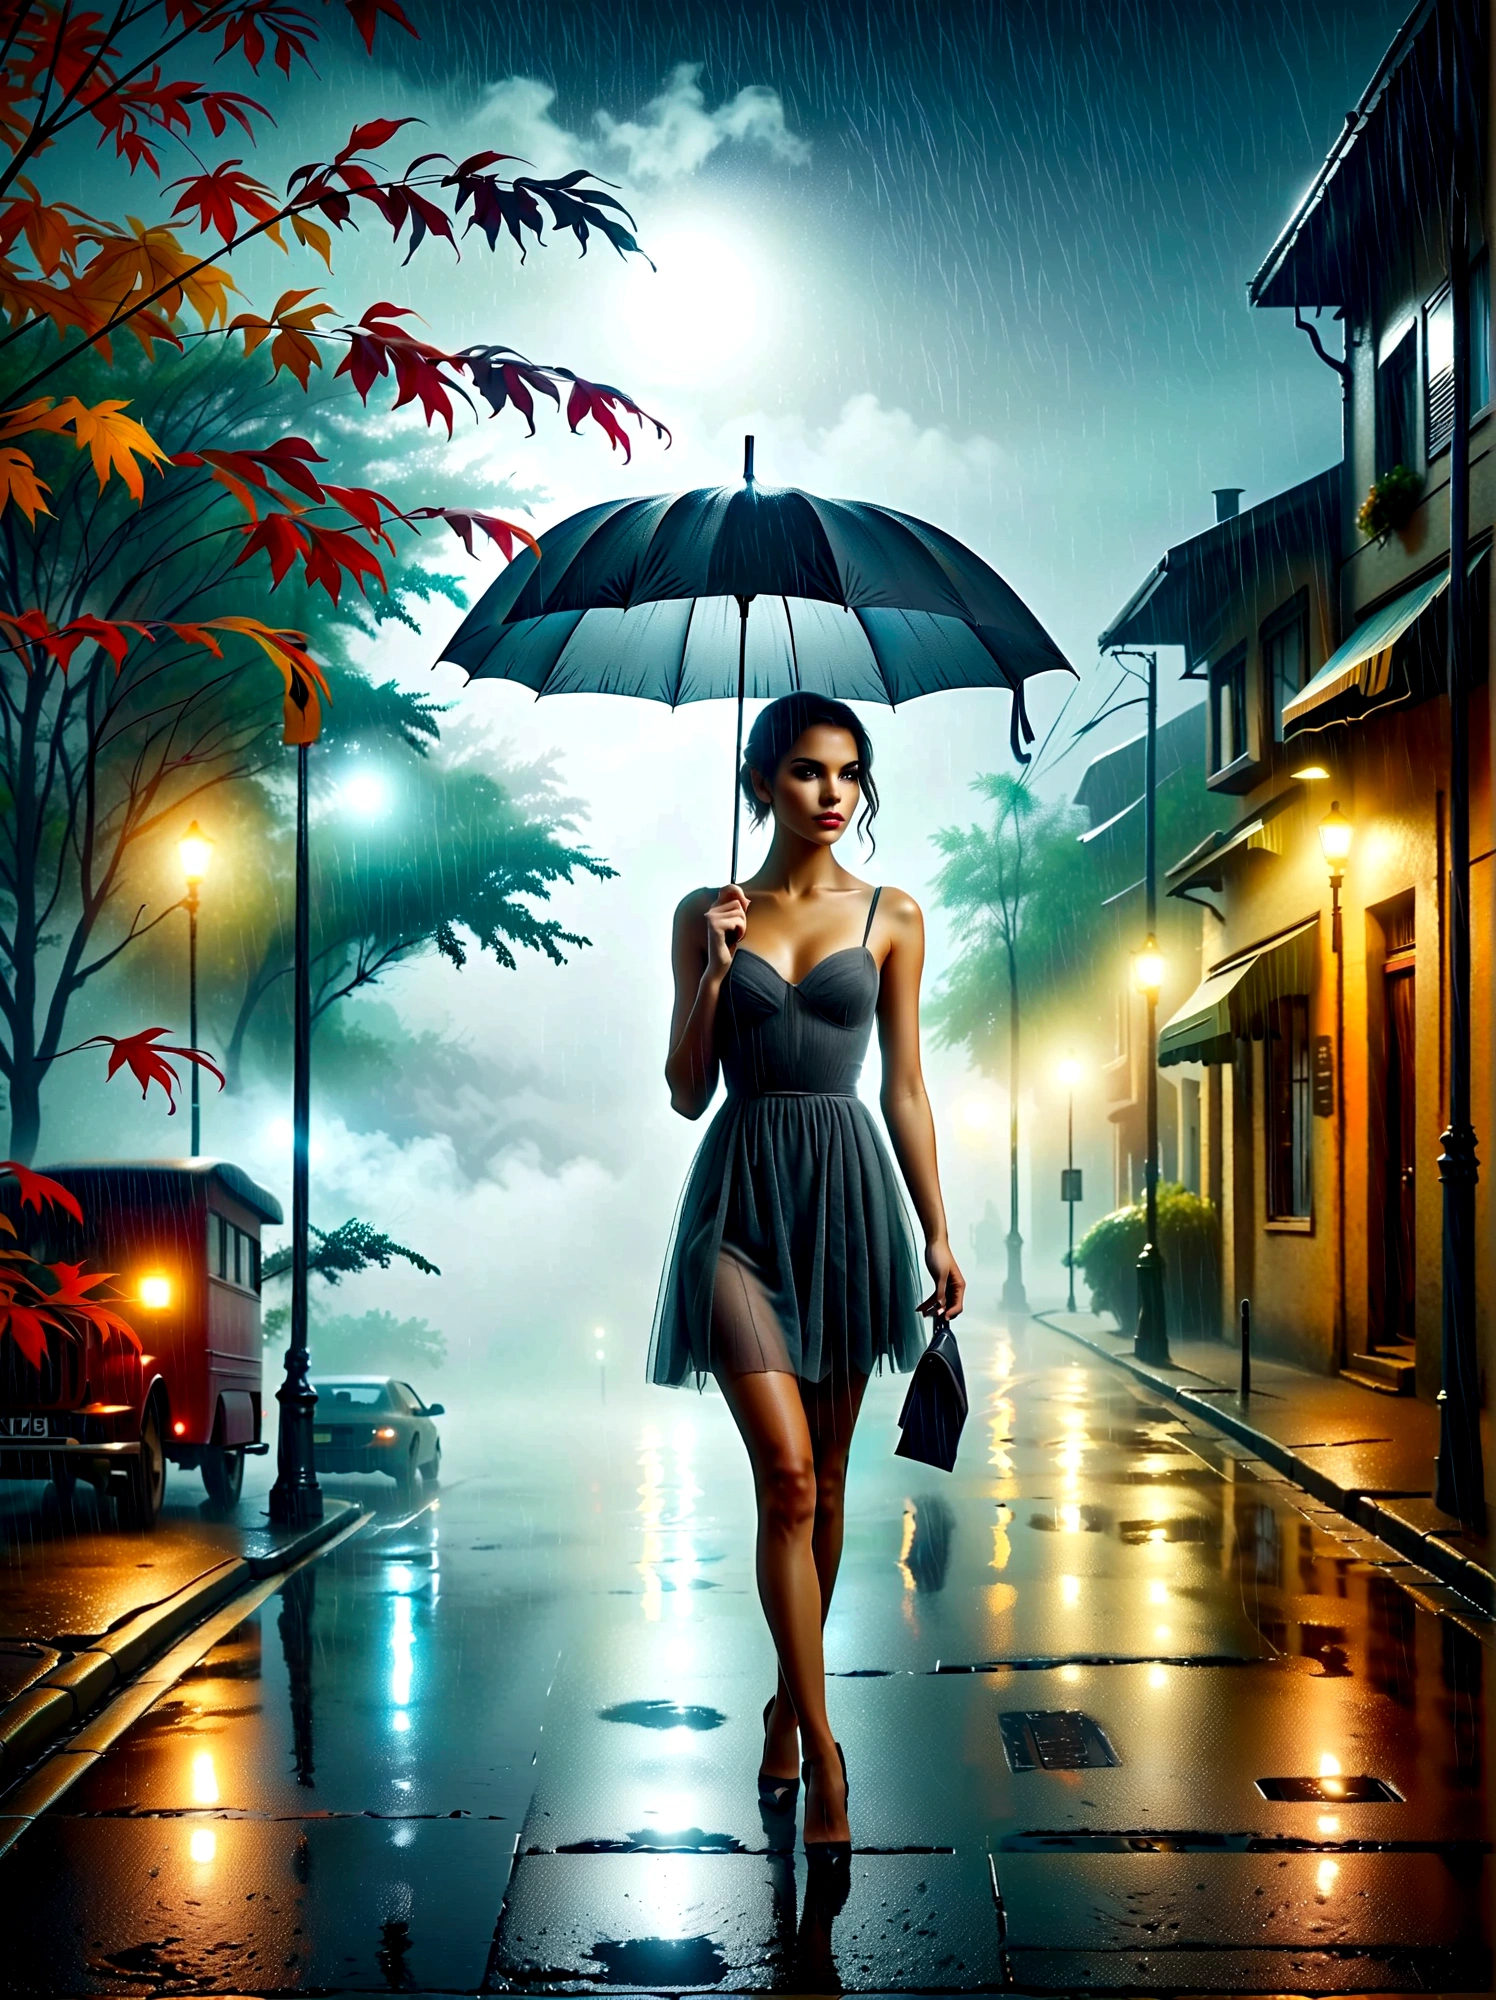 Woman in tight dress with umbrella in hand, in einer mistyen Stadt, colorful autumn leaves on the street, a picture by Kuno Veeber, pixabay contest winner, conceptual art, standing in the rain,  mysterious woman, pretty girl, that stands in the rain, Single person with umbrella, woman ((silhouette)), ((misty)) and rainy, female image in the shadow, in a rainy environment, Rainy weather, Rainy roads in the background , ((Fog with light)), ((View from behind)), Light from the front